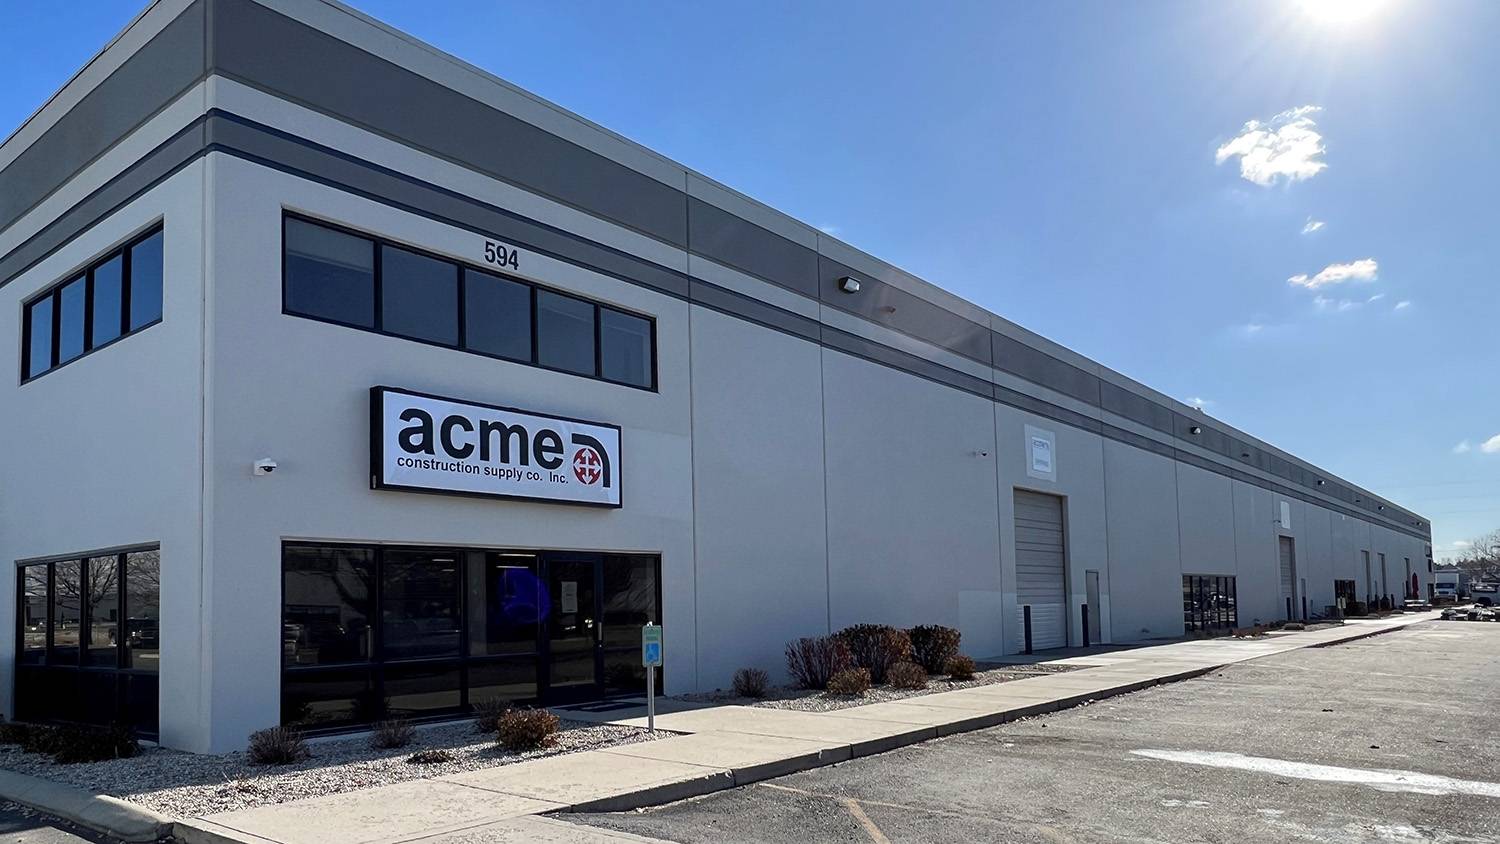 Acme Construction Supply Co, Inc's Grand Opening in Boise